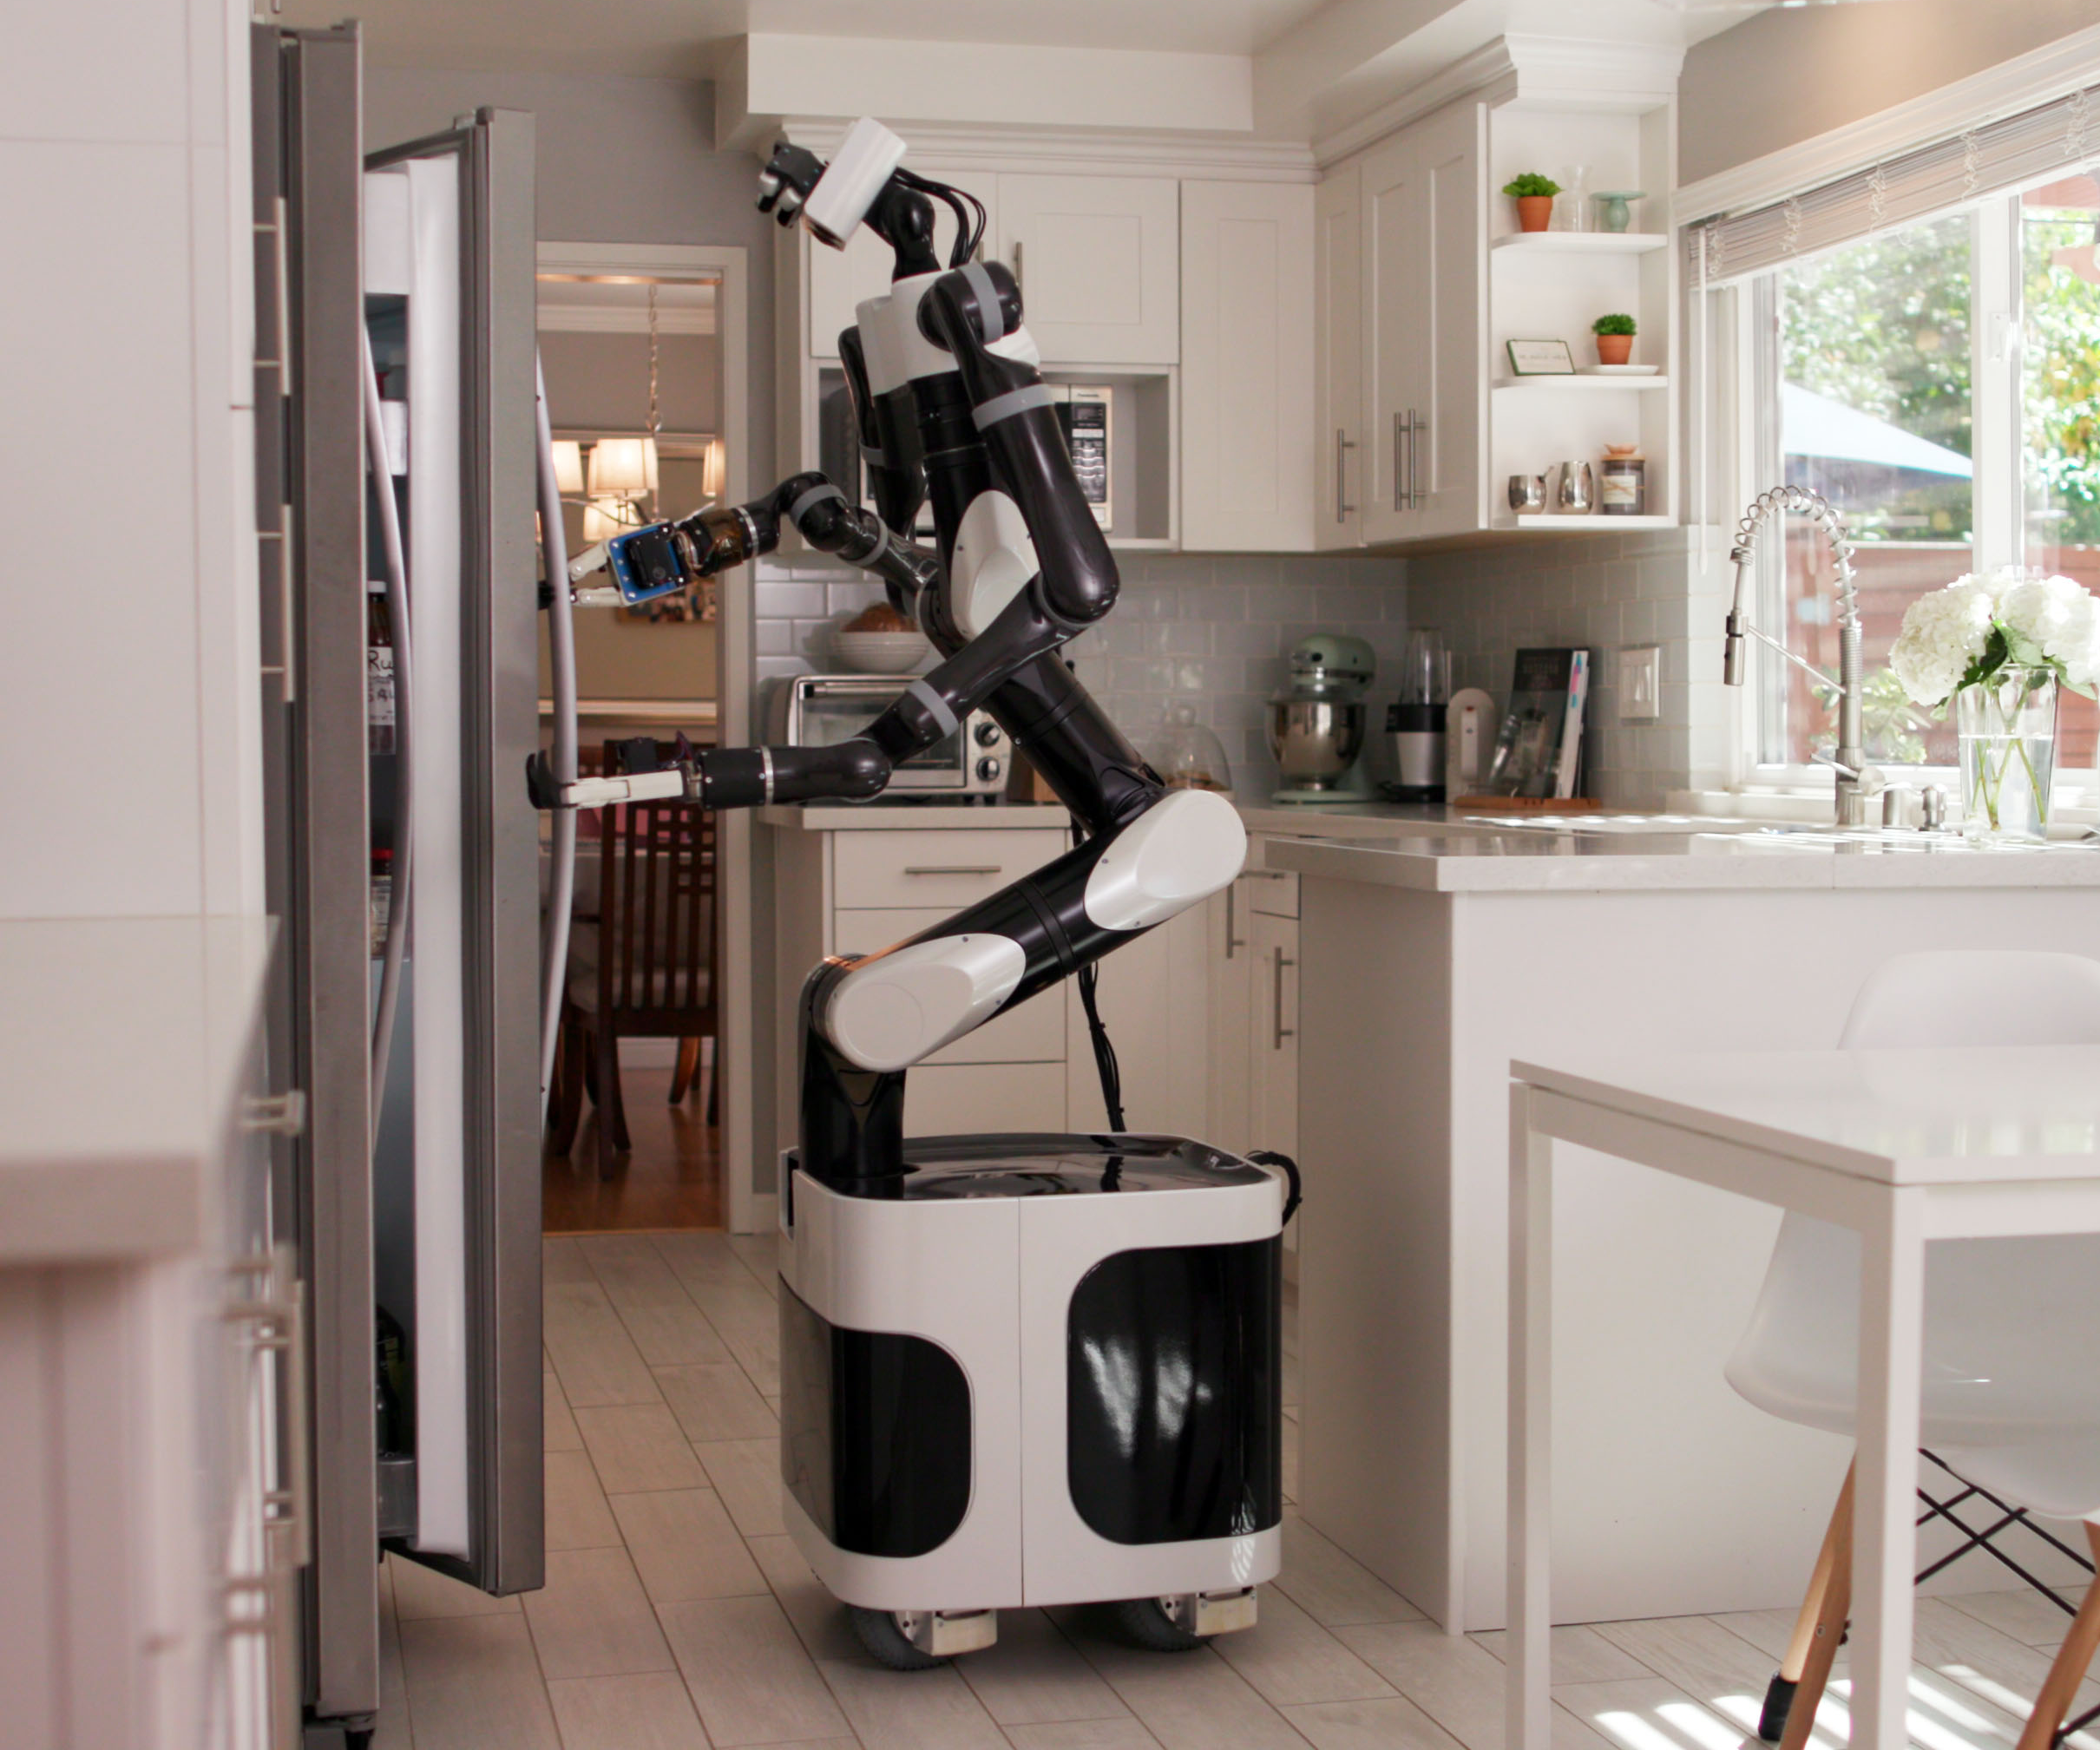 TRI Teaching Robots to Help People in their Homes